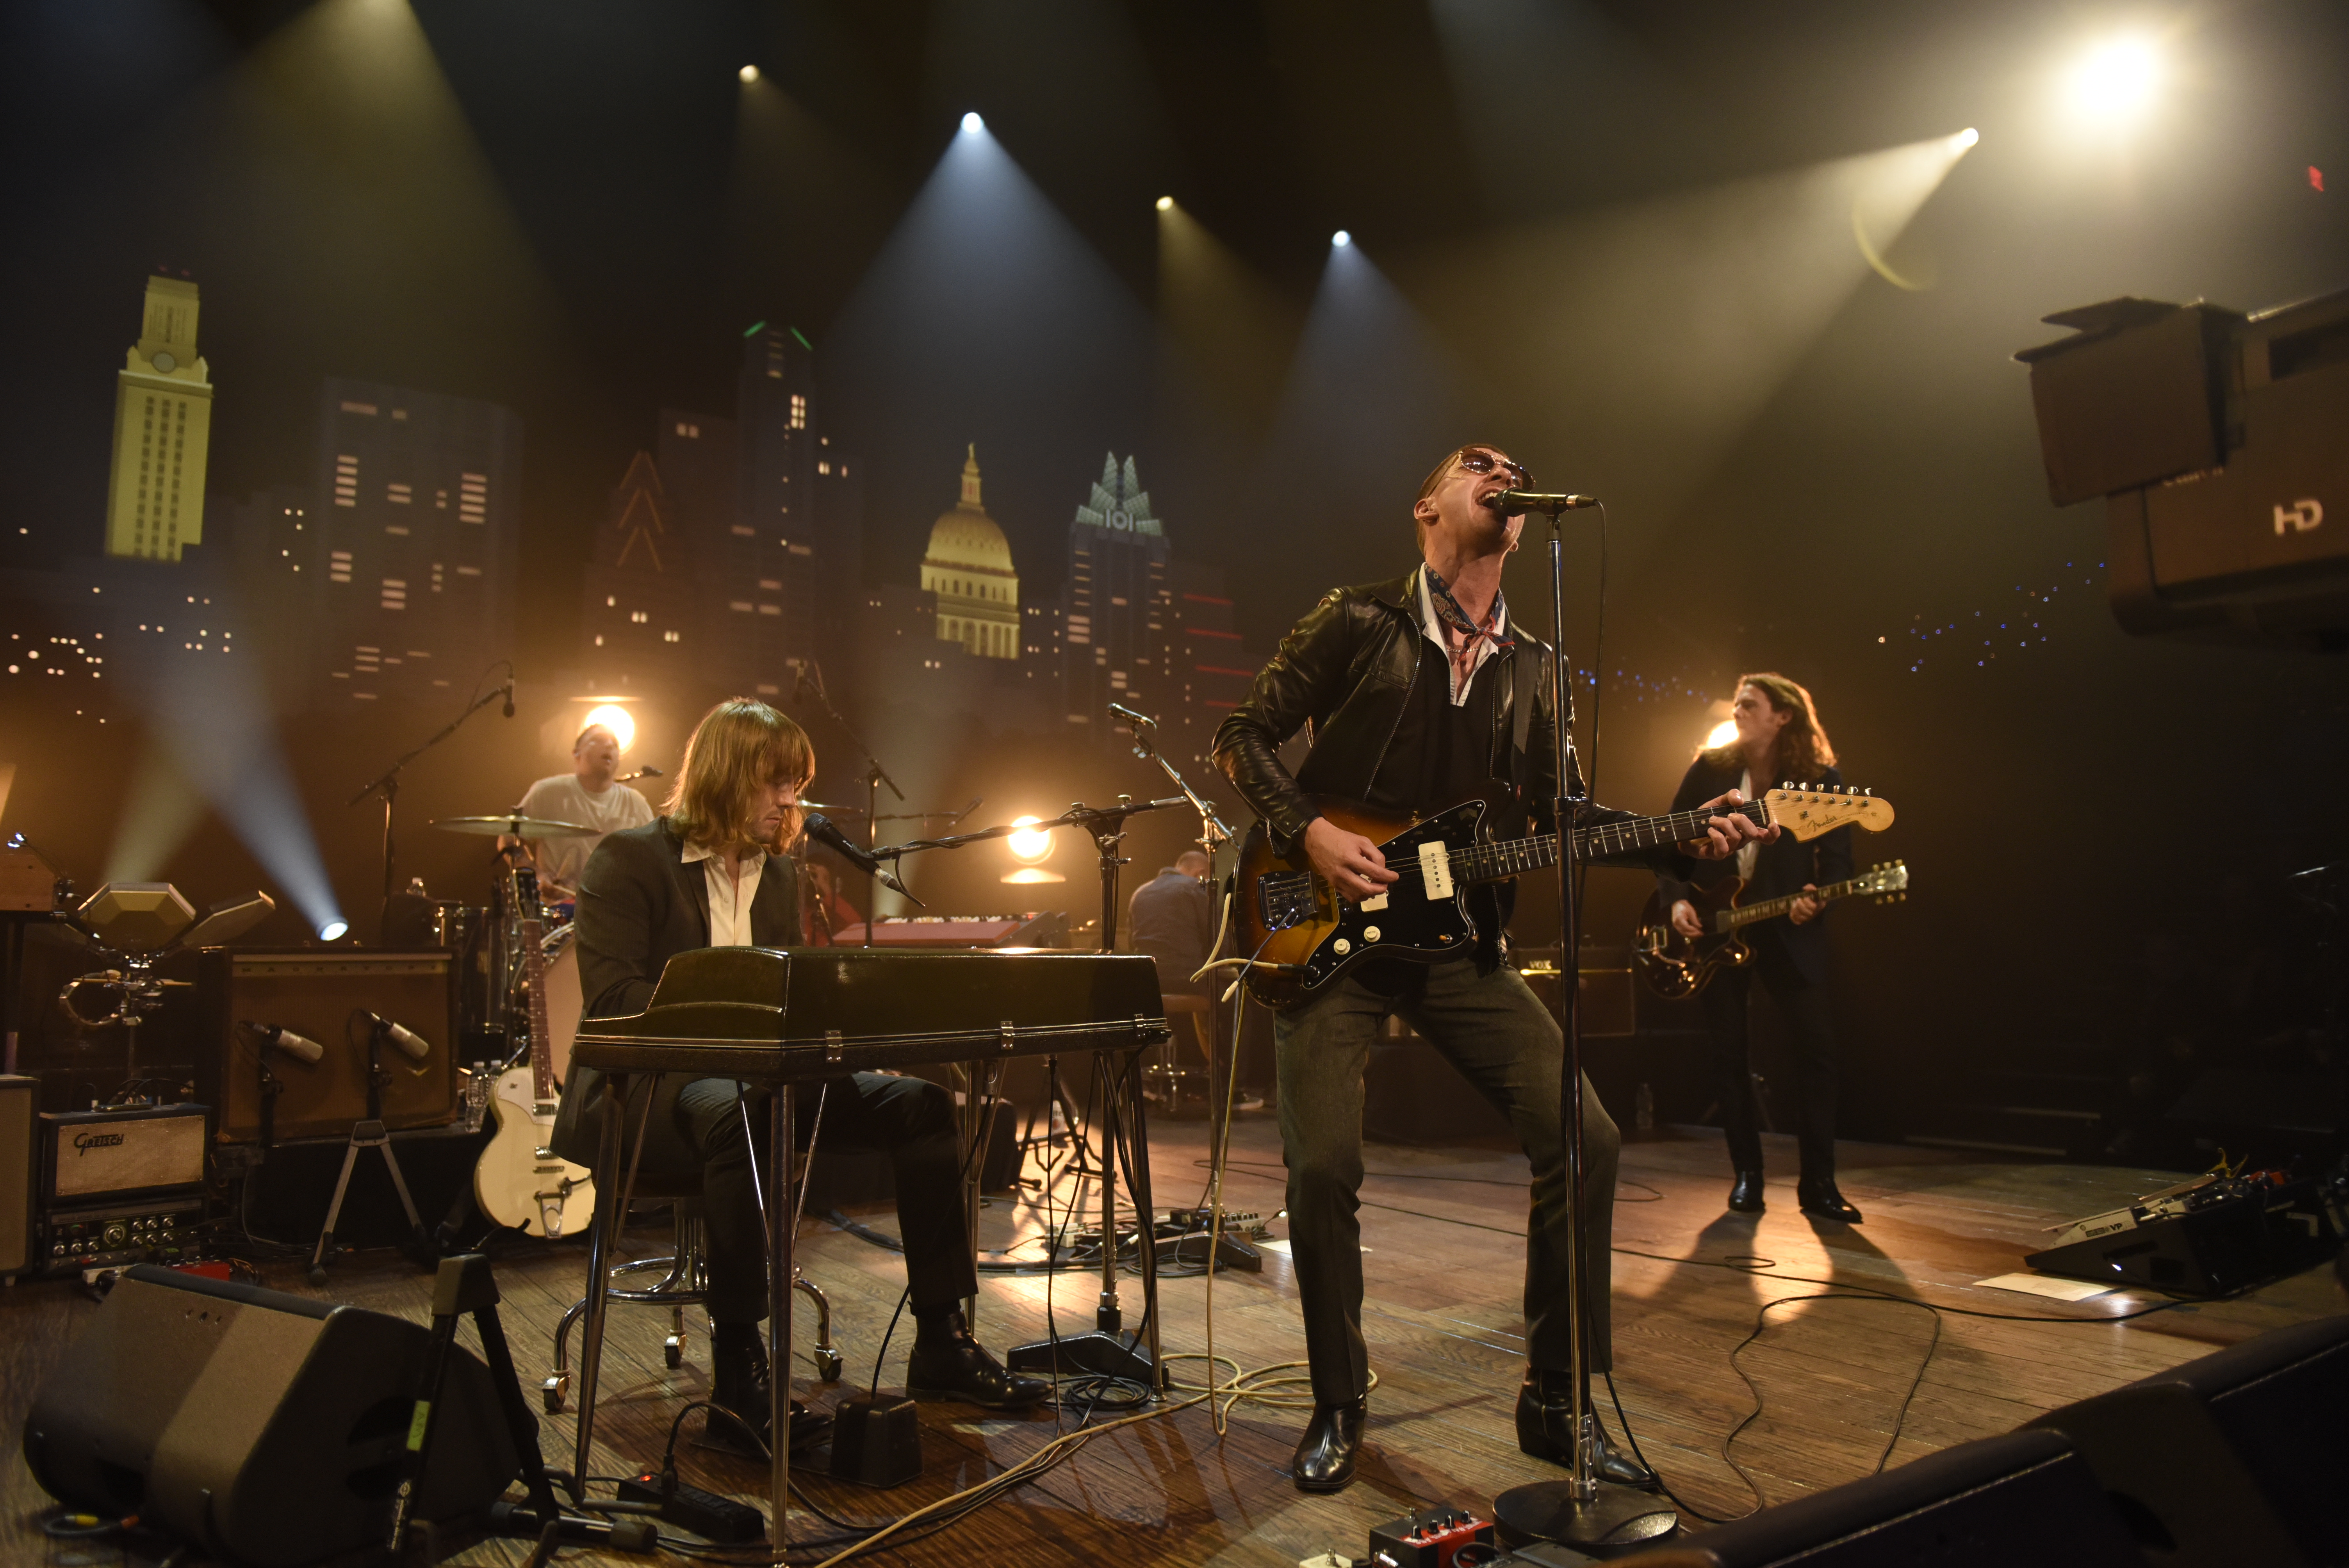 Arctic Monkeys chase superstardom on debut ACL taping | Austin City Limits